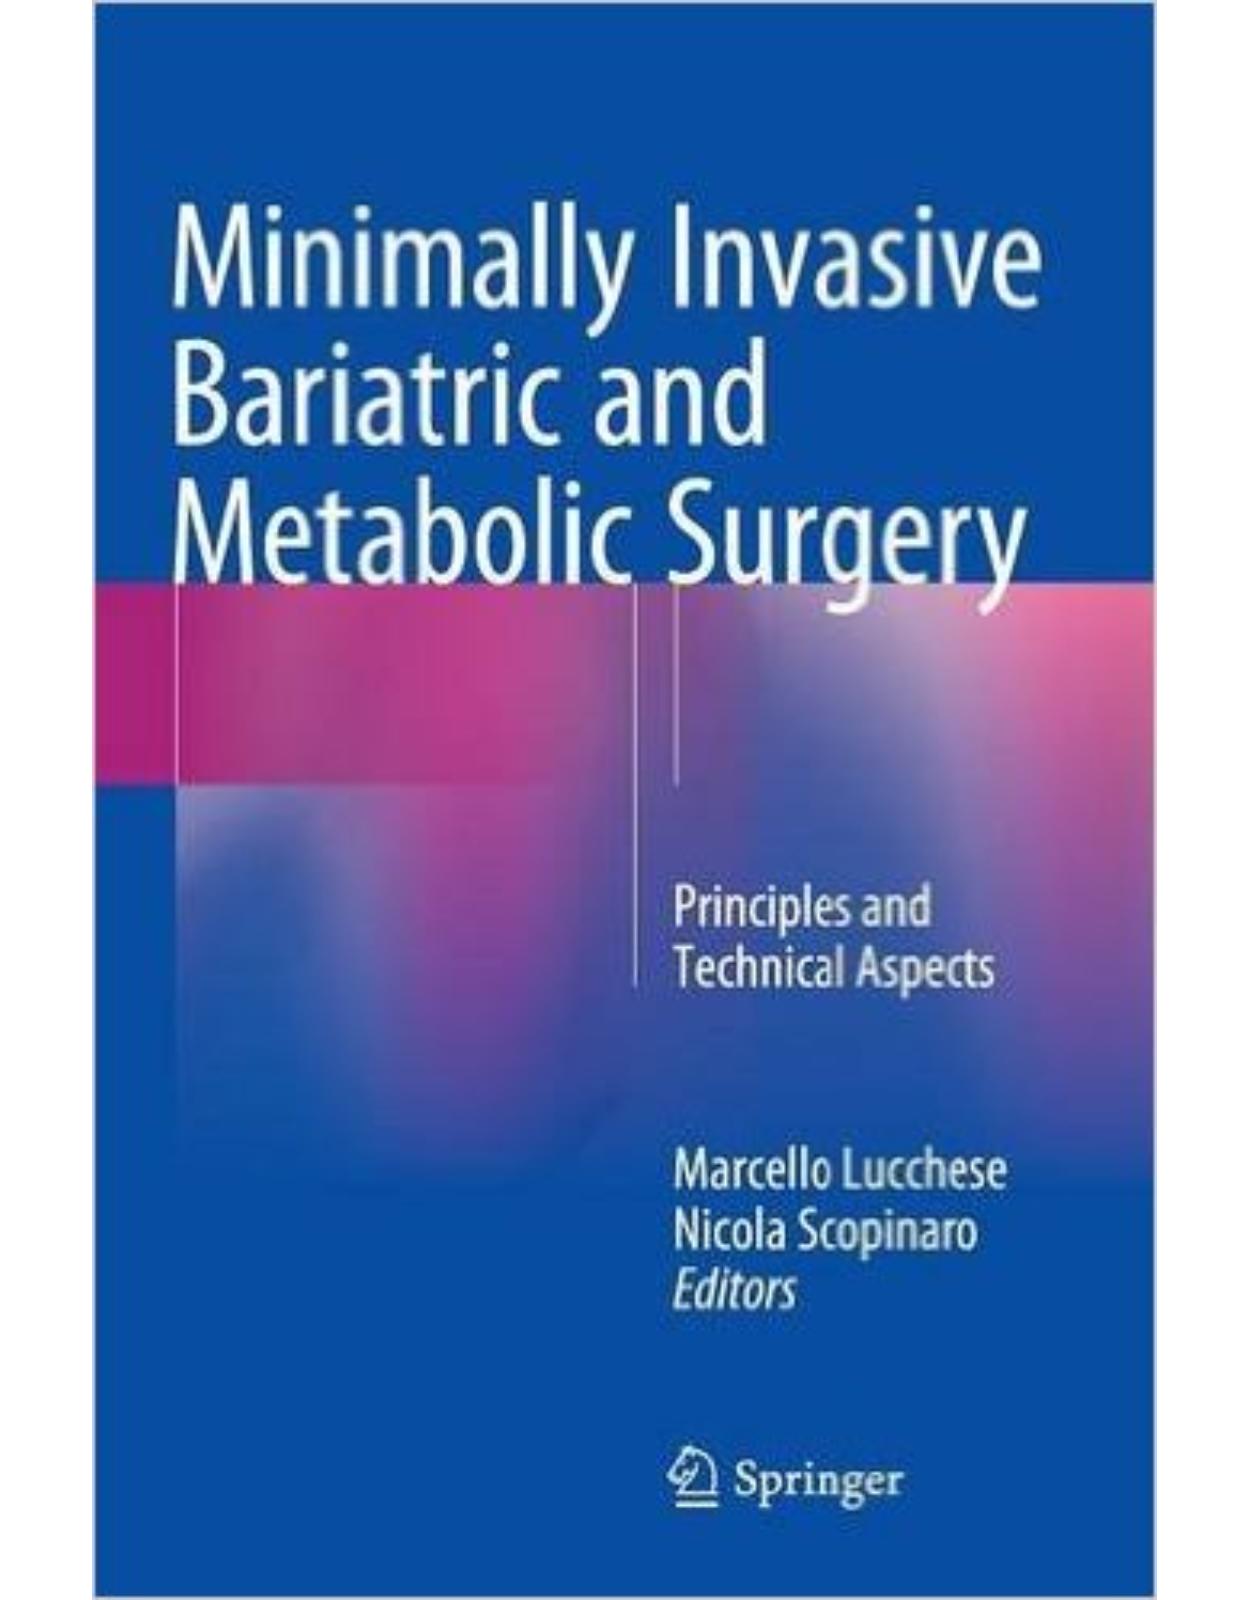 Minimally Invasive Bariatric and Metabolic Surgery: Principles and Technical Aspects 1st ed. 2015 Edition